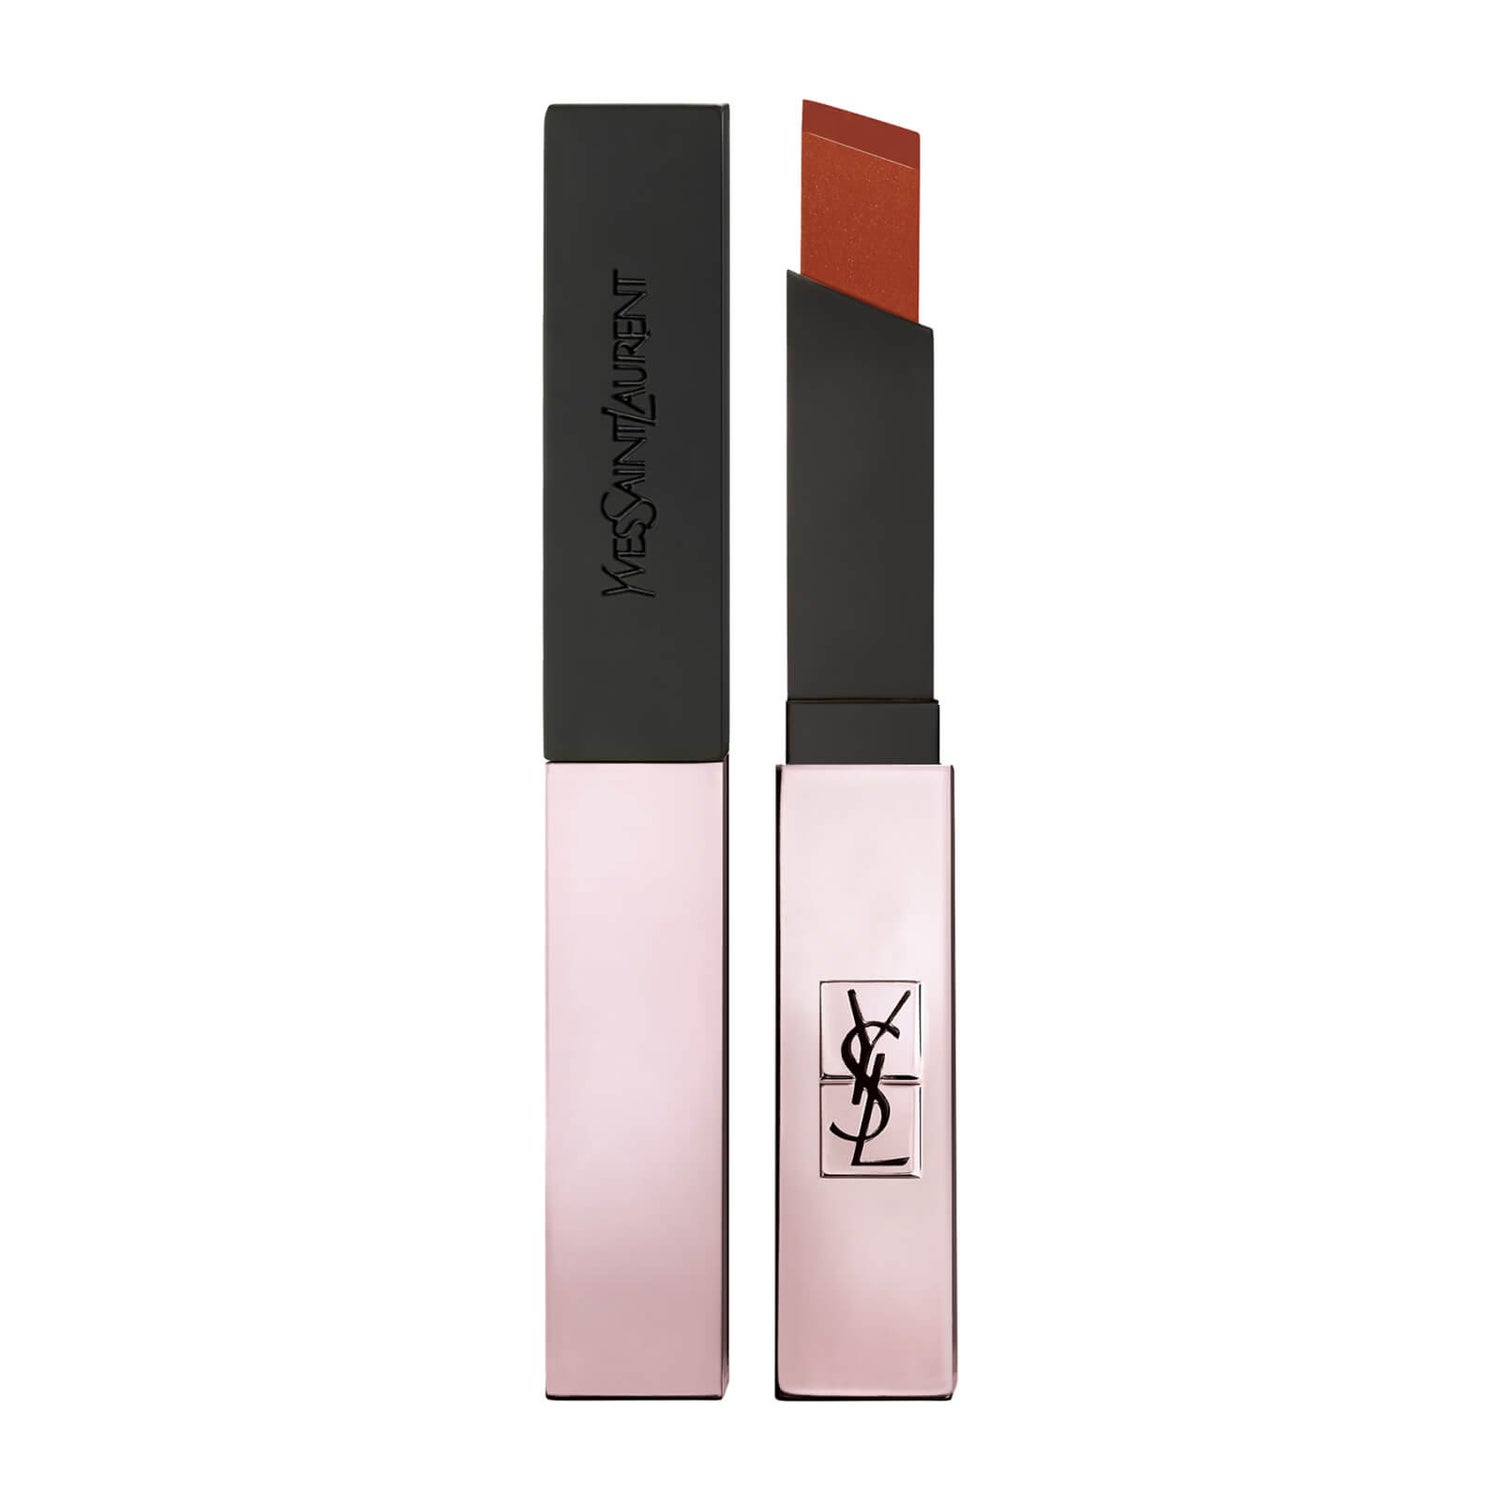 Yves Saint Laurent Rouge Pur Couture The Slim Glow Matte Lipstick - 213 Forbidden Chili